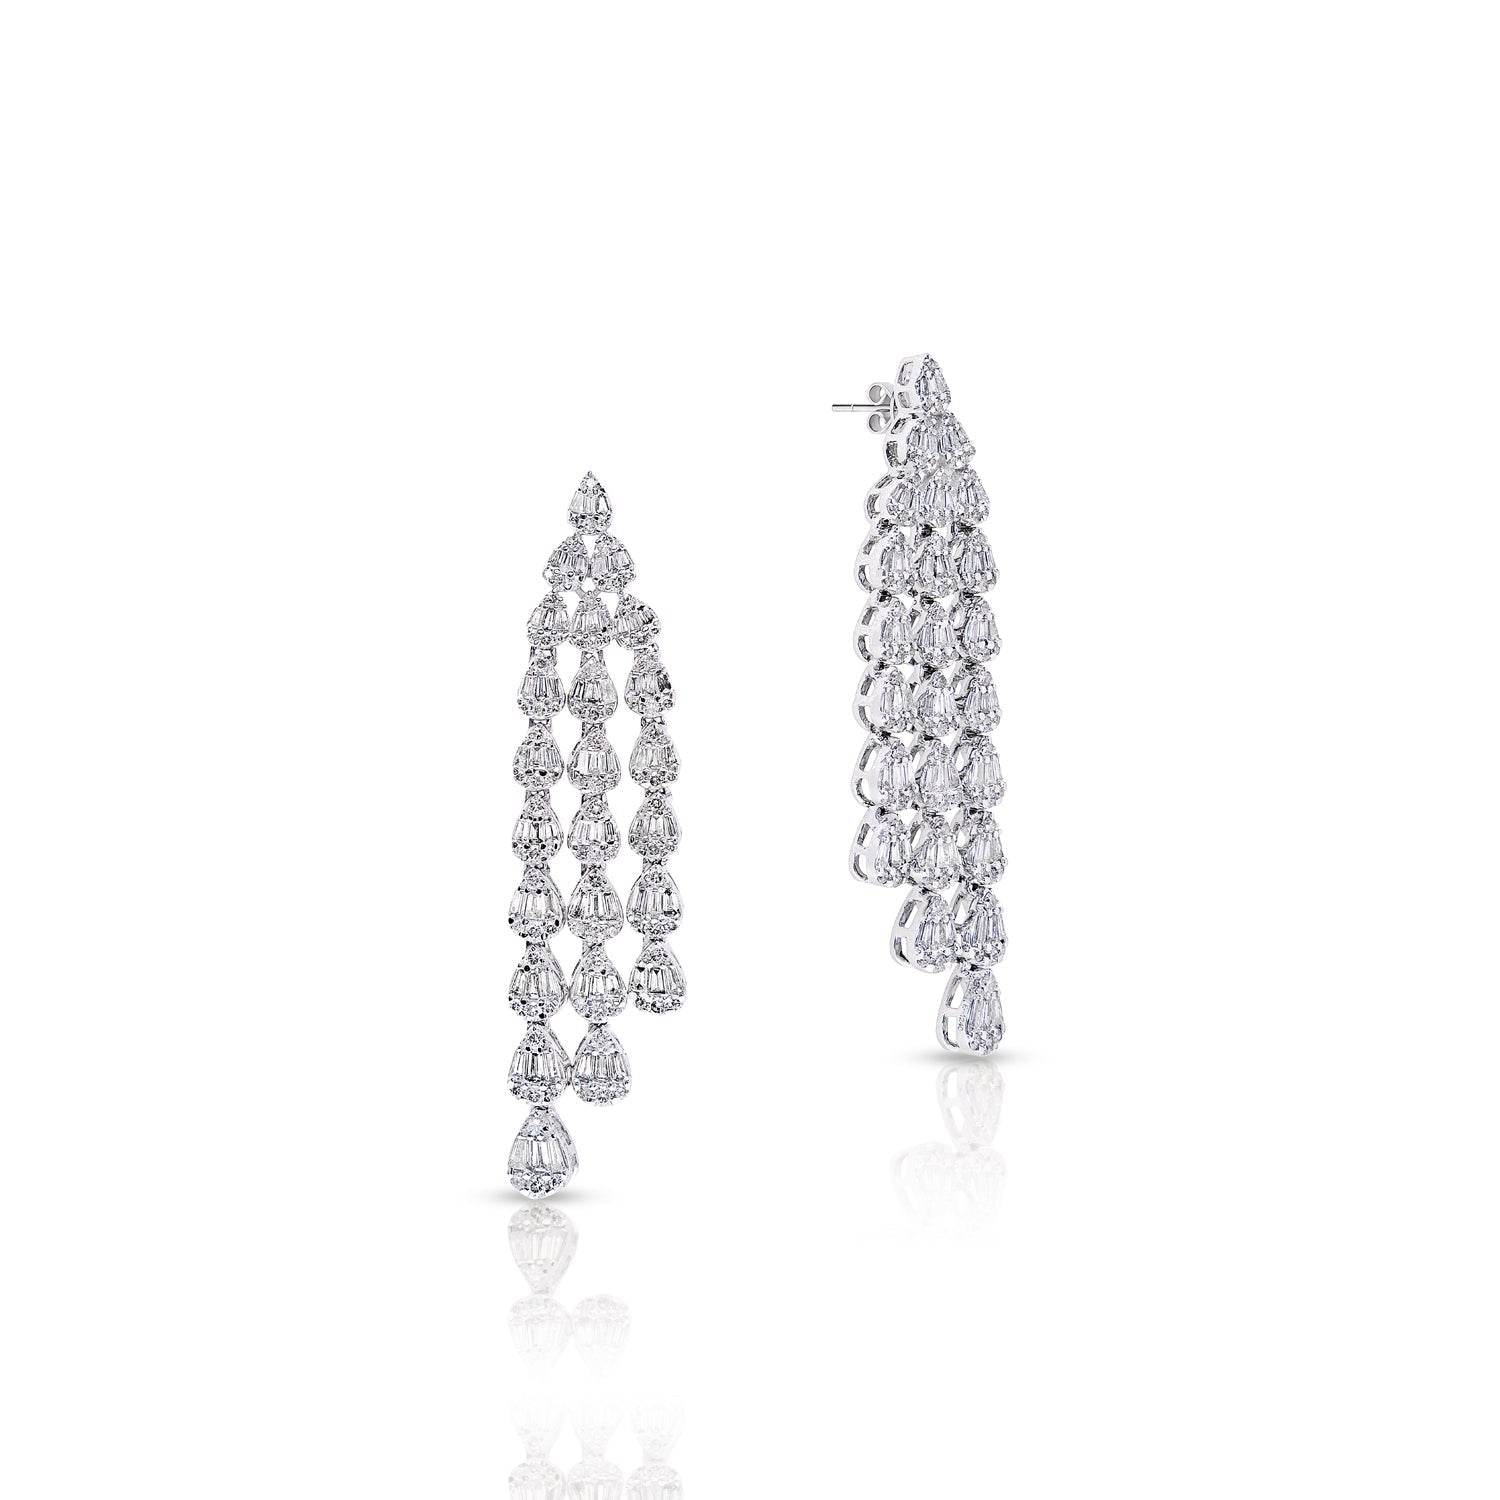 Lyla 3 Carat Baguette and Round Hanging Earth Mined Diamond Earrings in 14 Karat White Gold Front and Side View